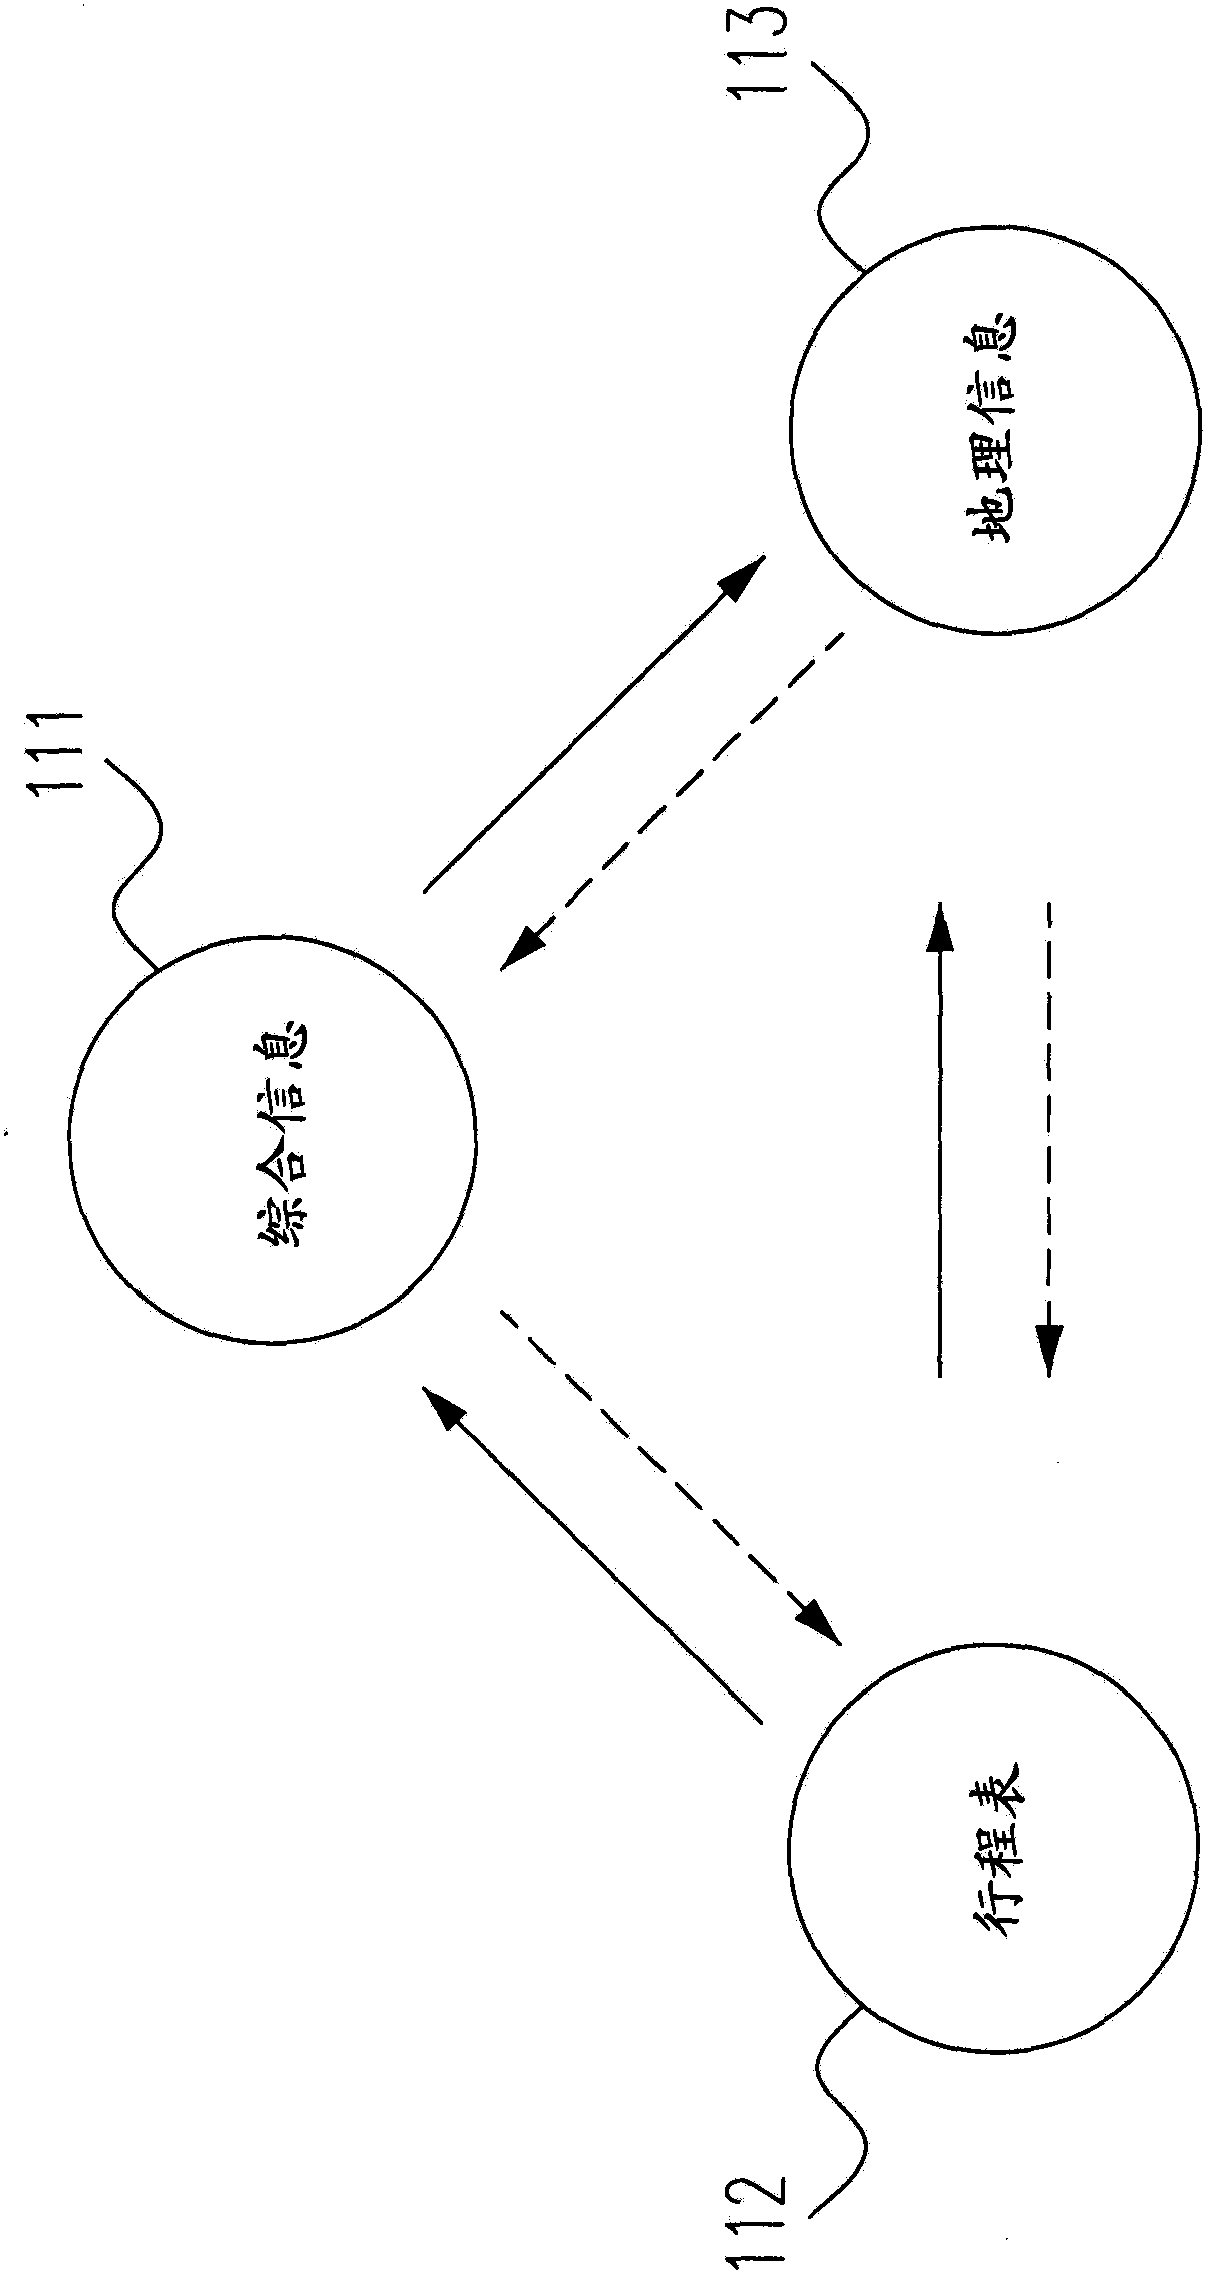 Itinerary planning system and itinerary planning, estimating and automatic producing method